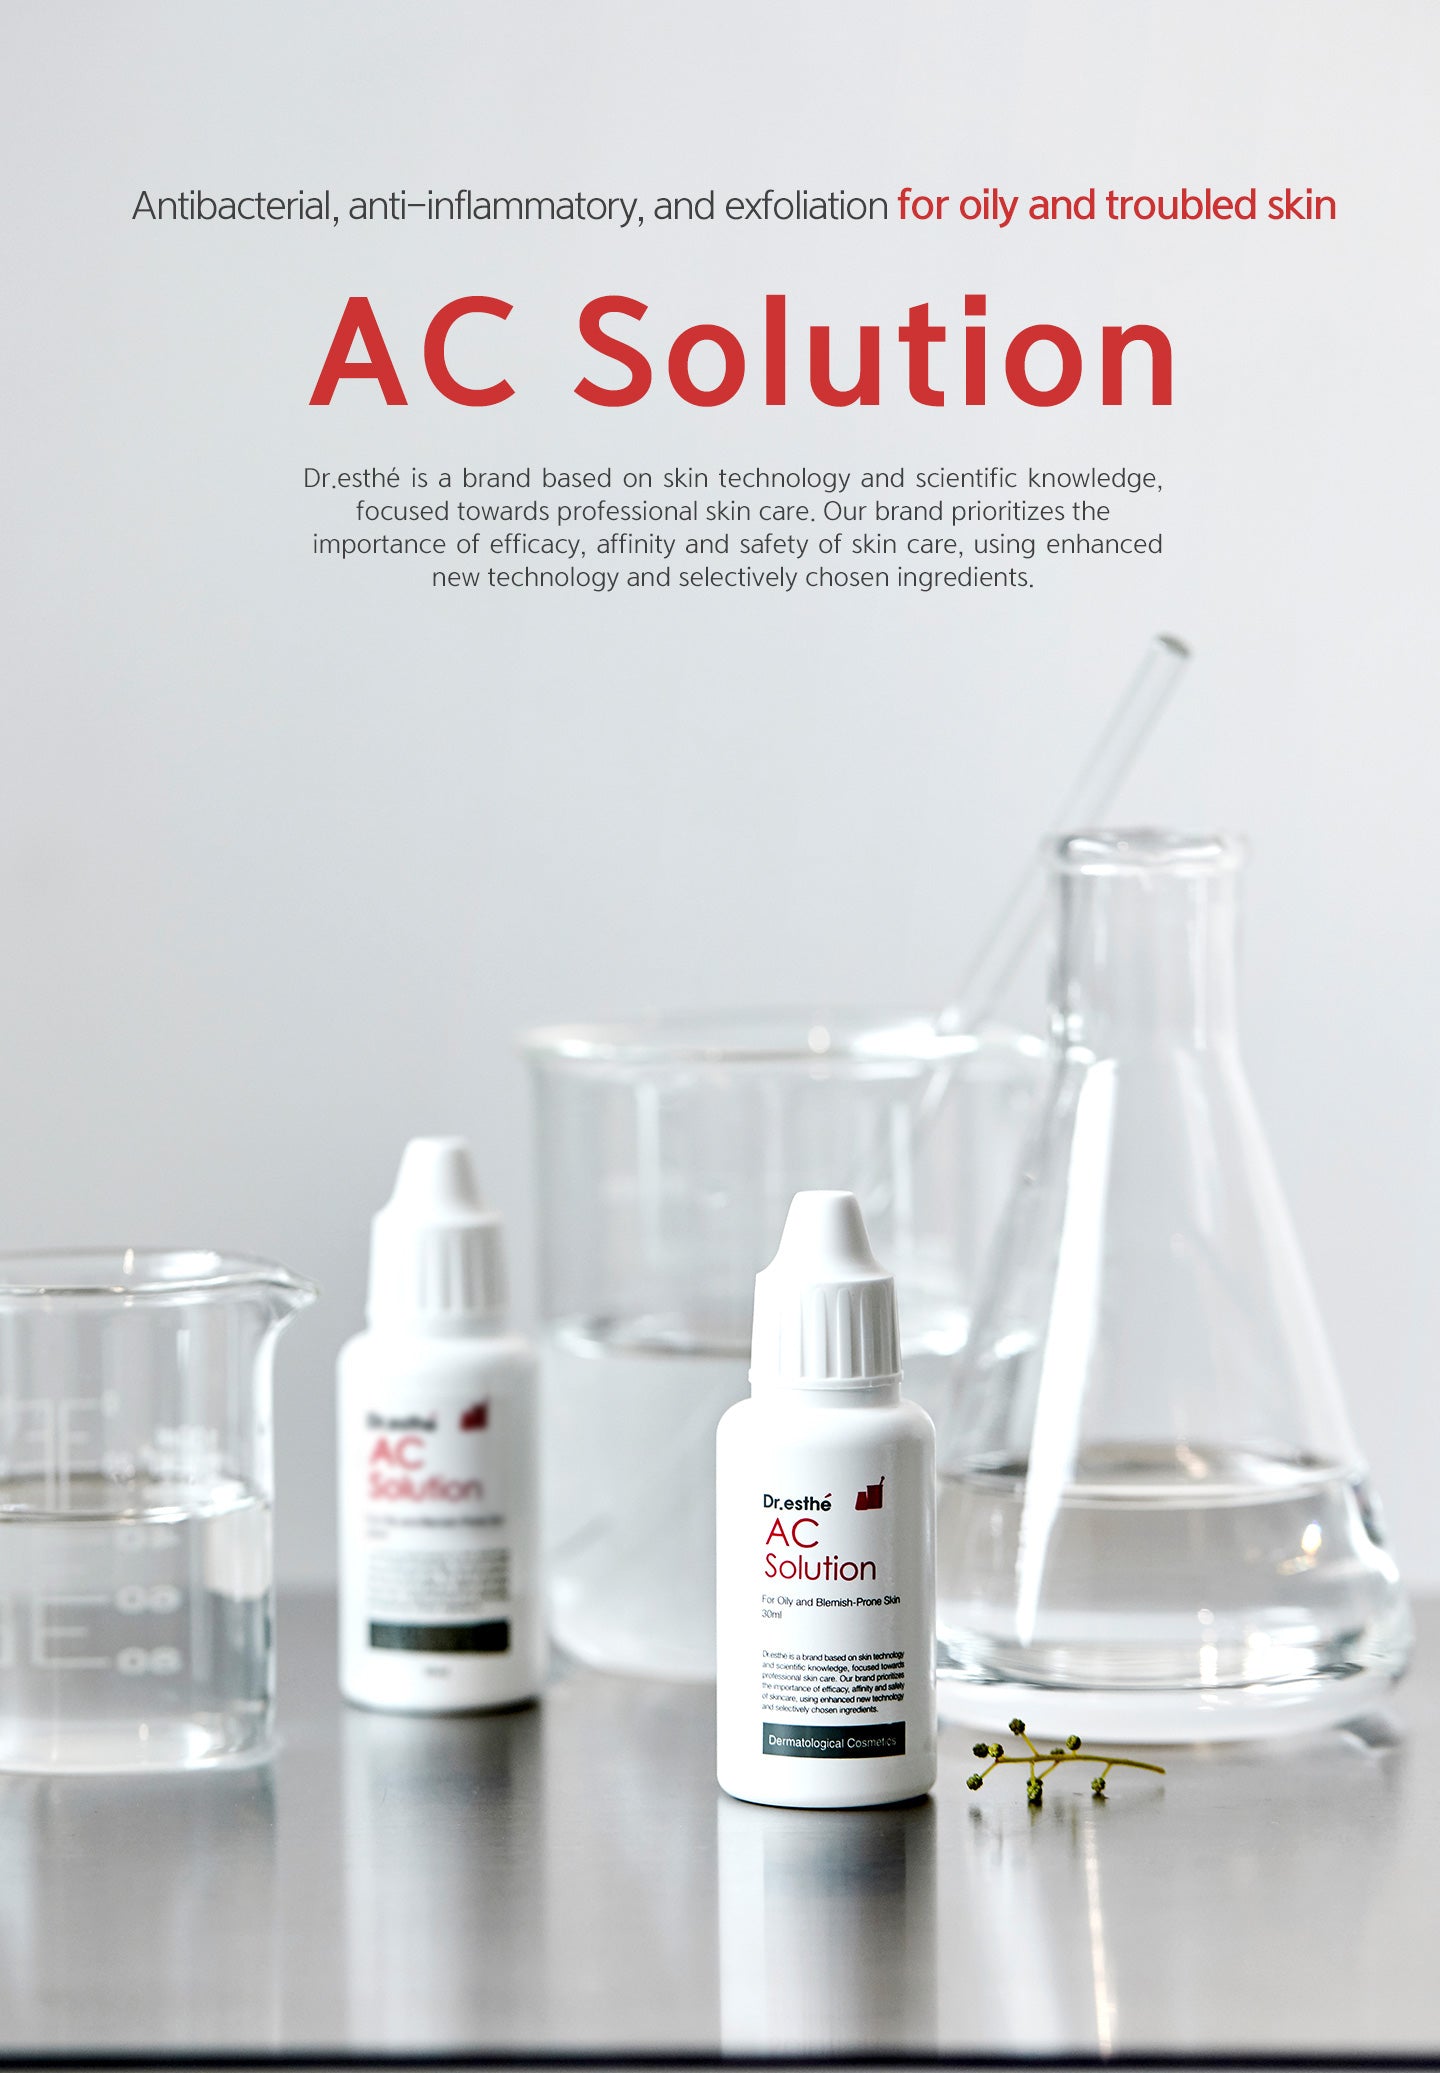 Antibacterial, anti-inflammatory, and exfoliation for oily and troubled skin. AC soluion